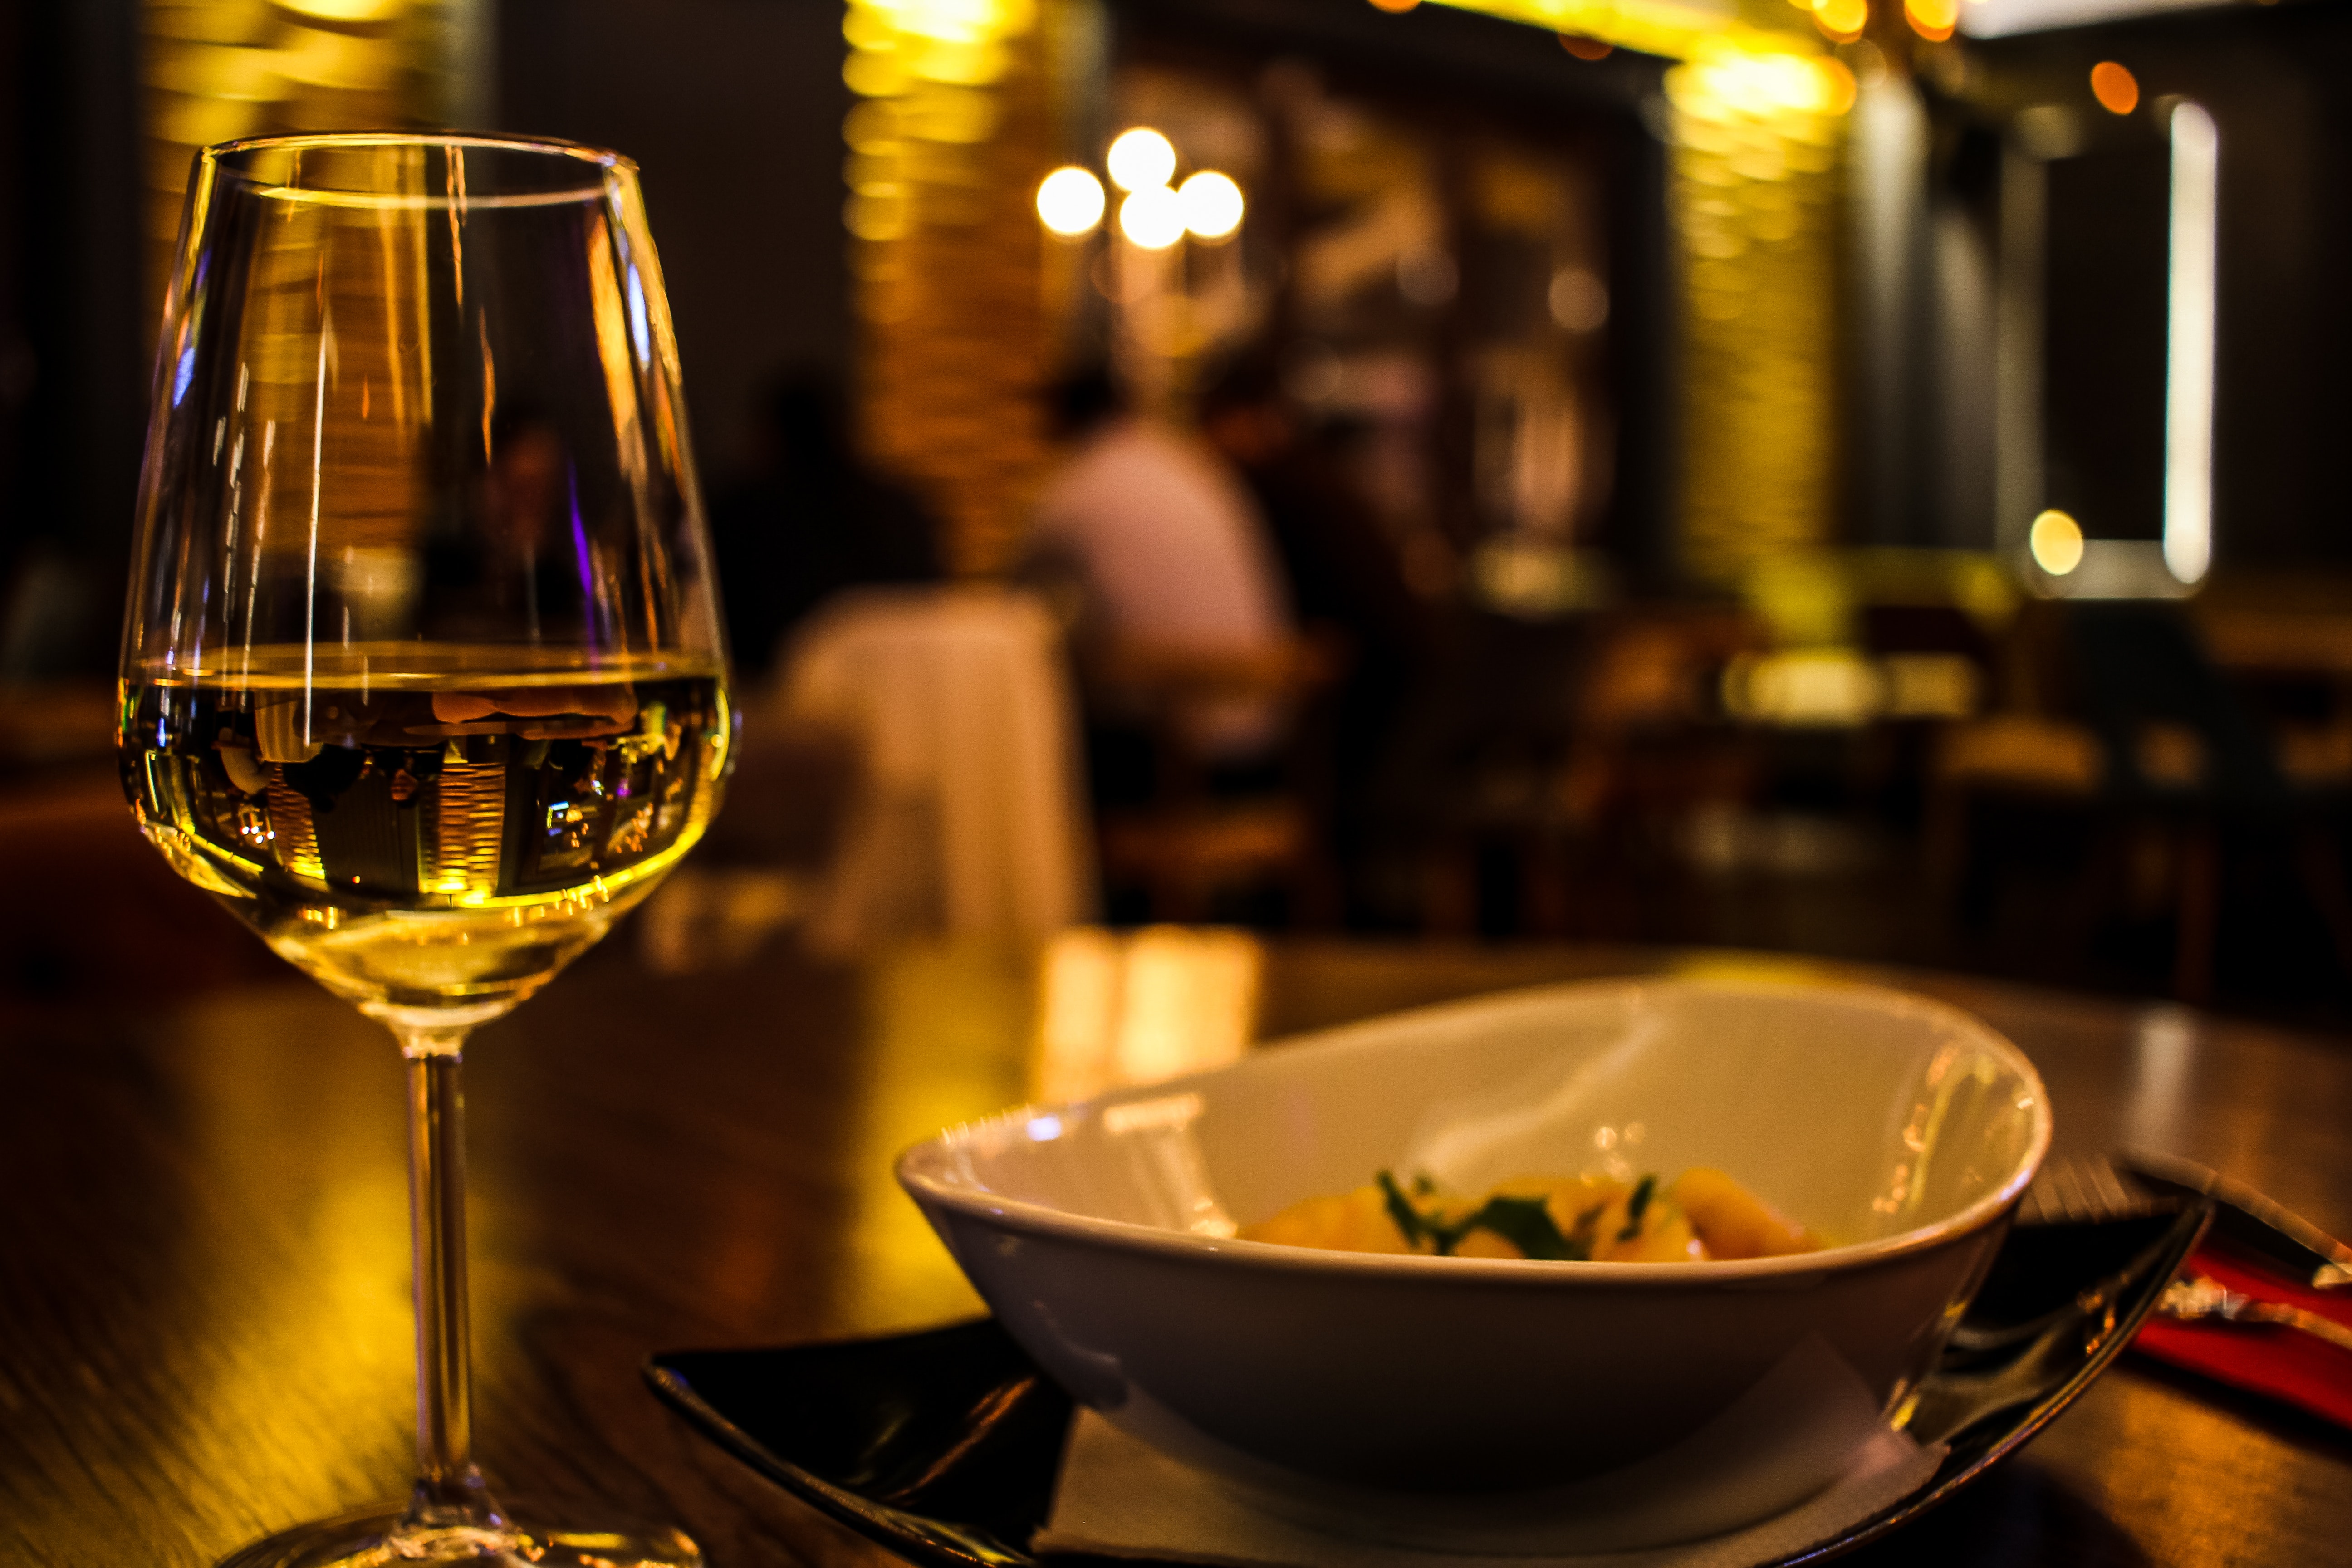 Check out our guide for pairing wine and Italian food!